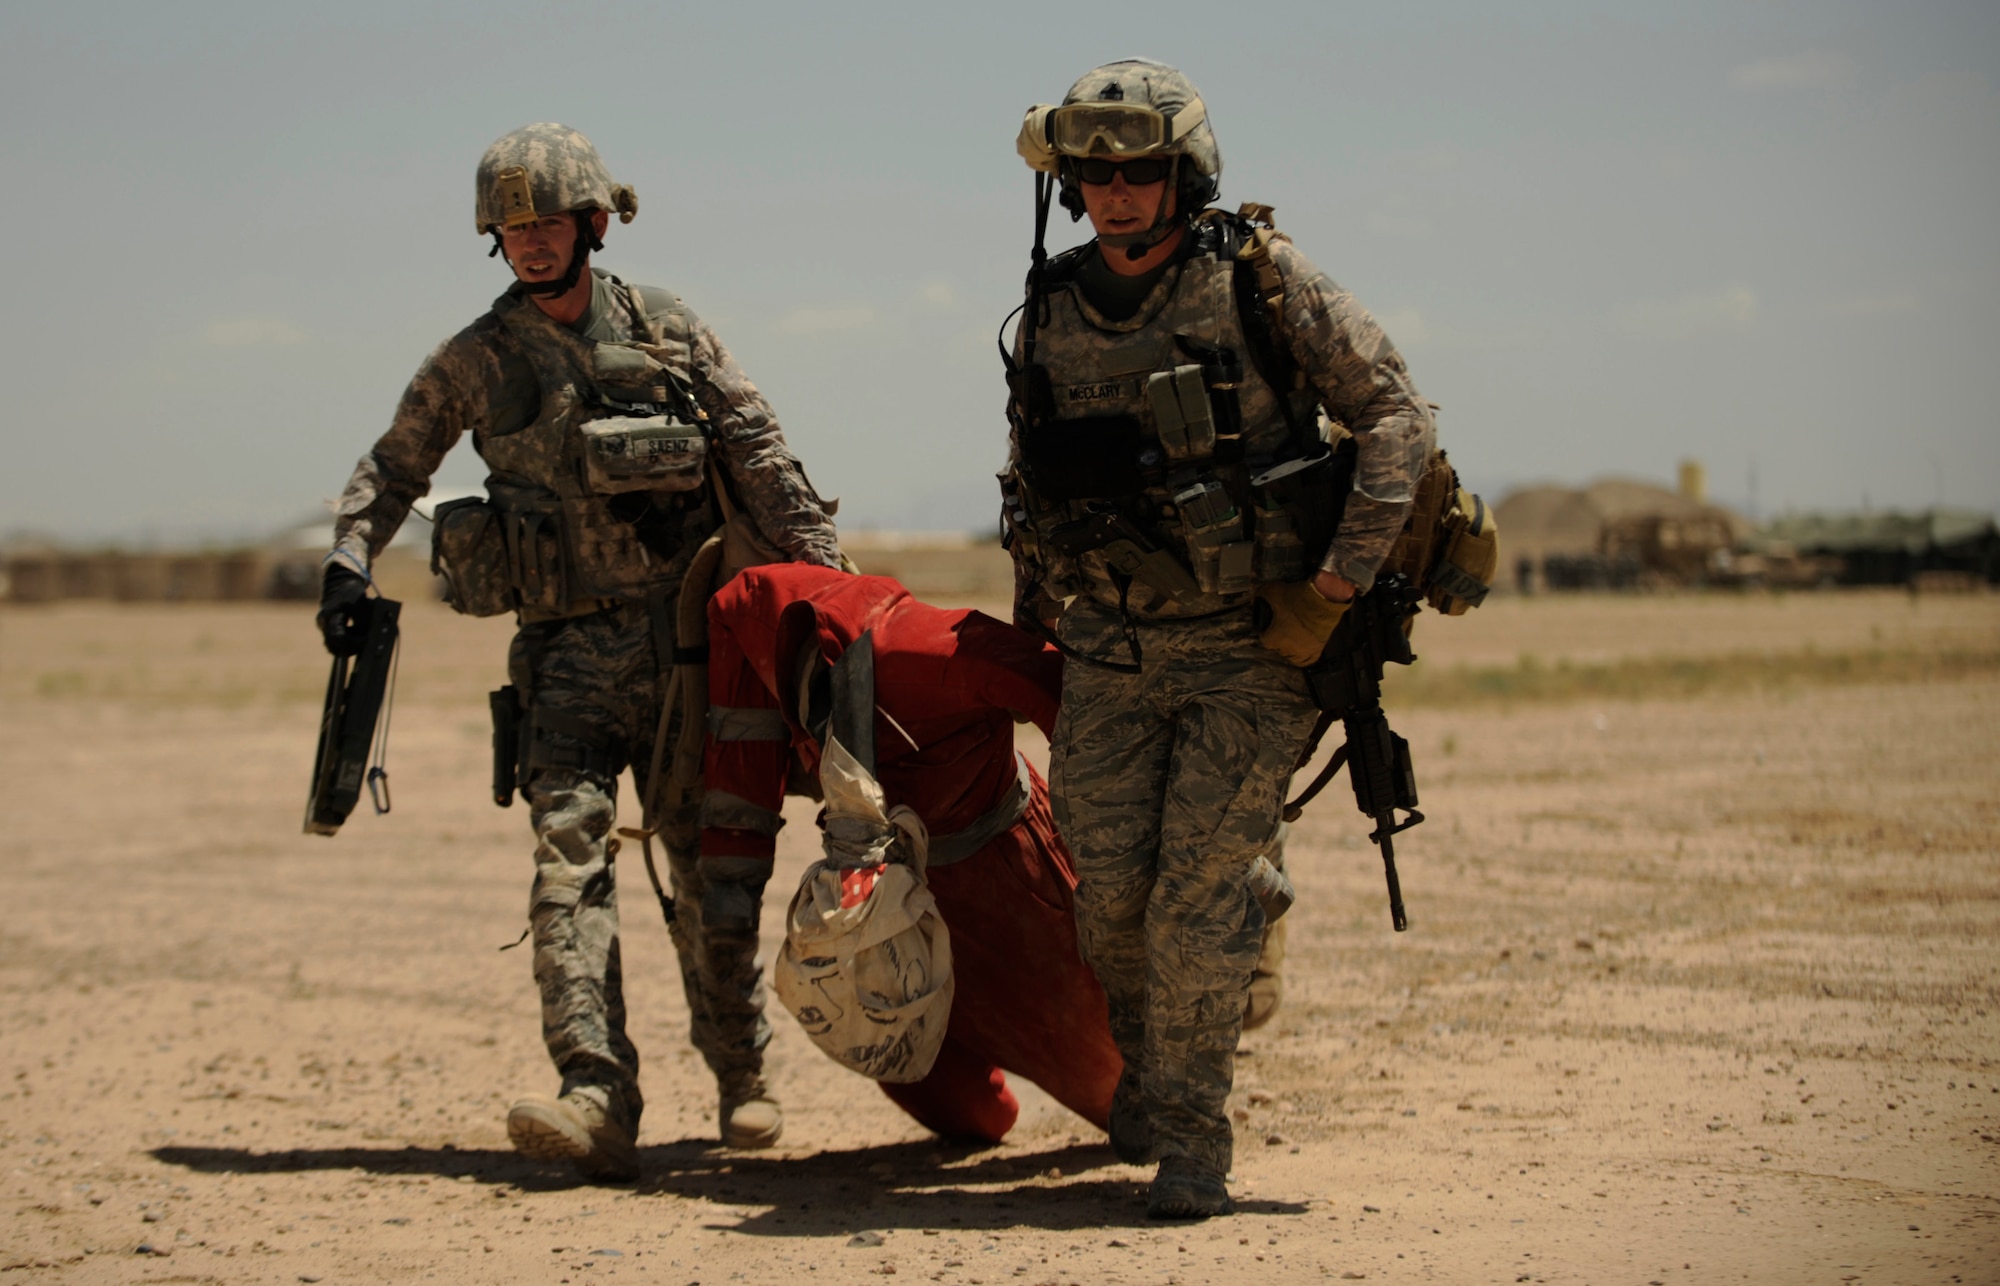 U.S. Air Force Staff Sgts. Ryan McCleary and Scott Saenz, both Explosive Ordinance Disposal technicians, 755th Explosive Ordinance Disposal, drag a simulated injured person from an IED site during joint explosive ordinance training at Kandahar Airfield, Afghanistan, on May 5, 2009, in support of Operation Enduring Freedom.  (U.S. Air Force photo by Staff Sgt. James L. Harper Jr.)